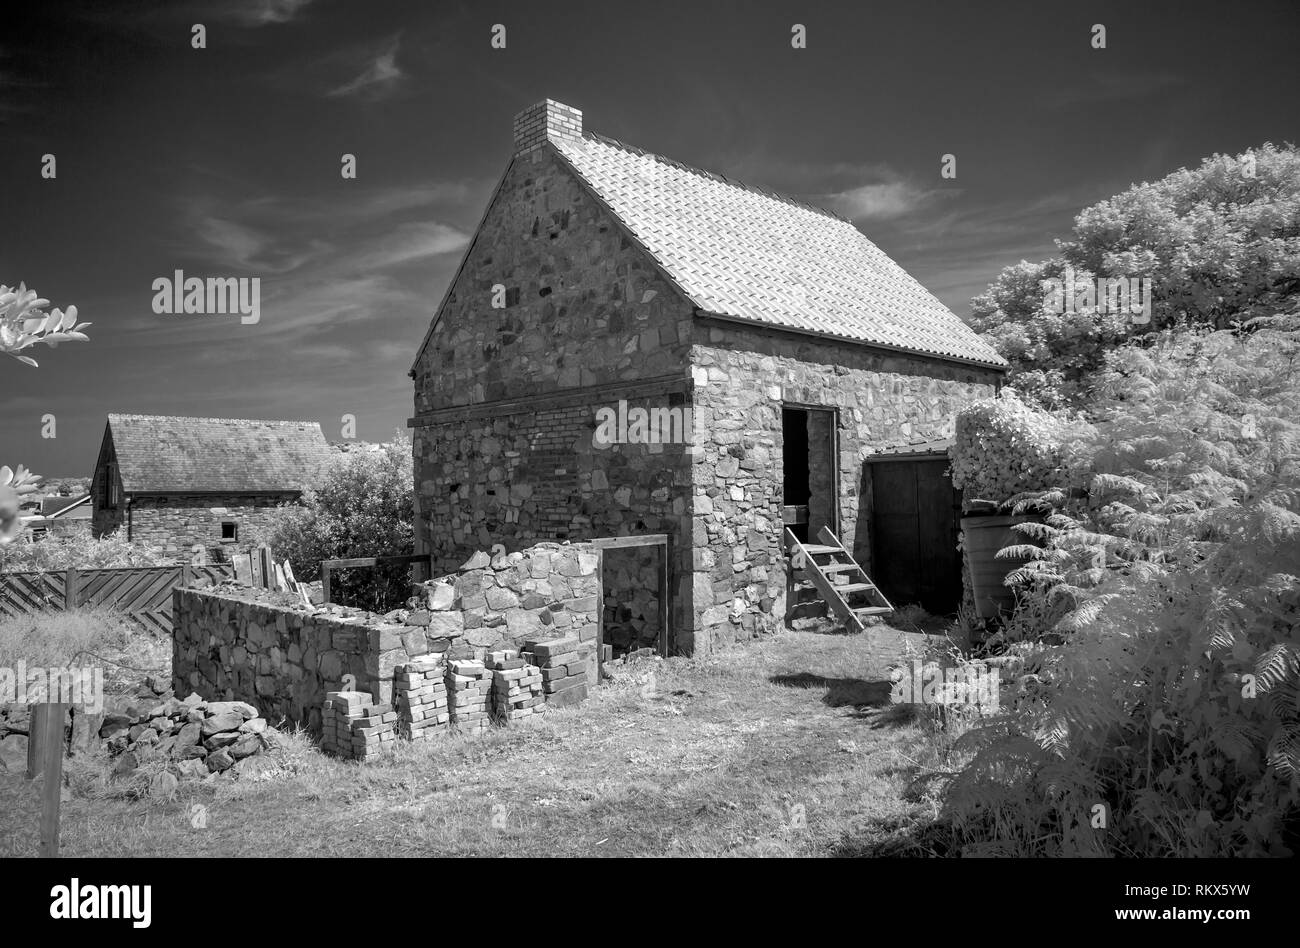 An infrared monochrome image of the Old Watermill on Alderney, Channel Islands. Stock Photo